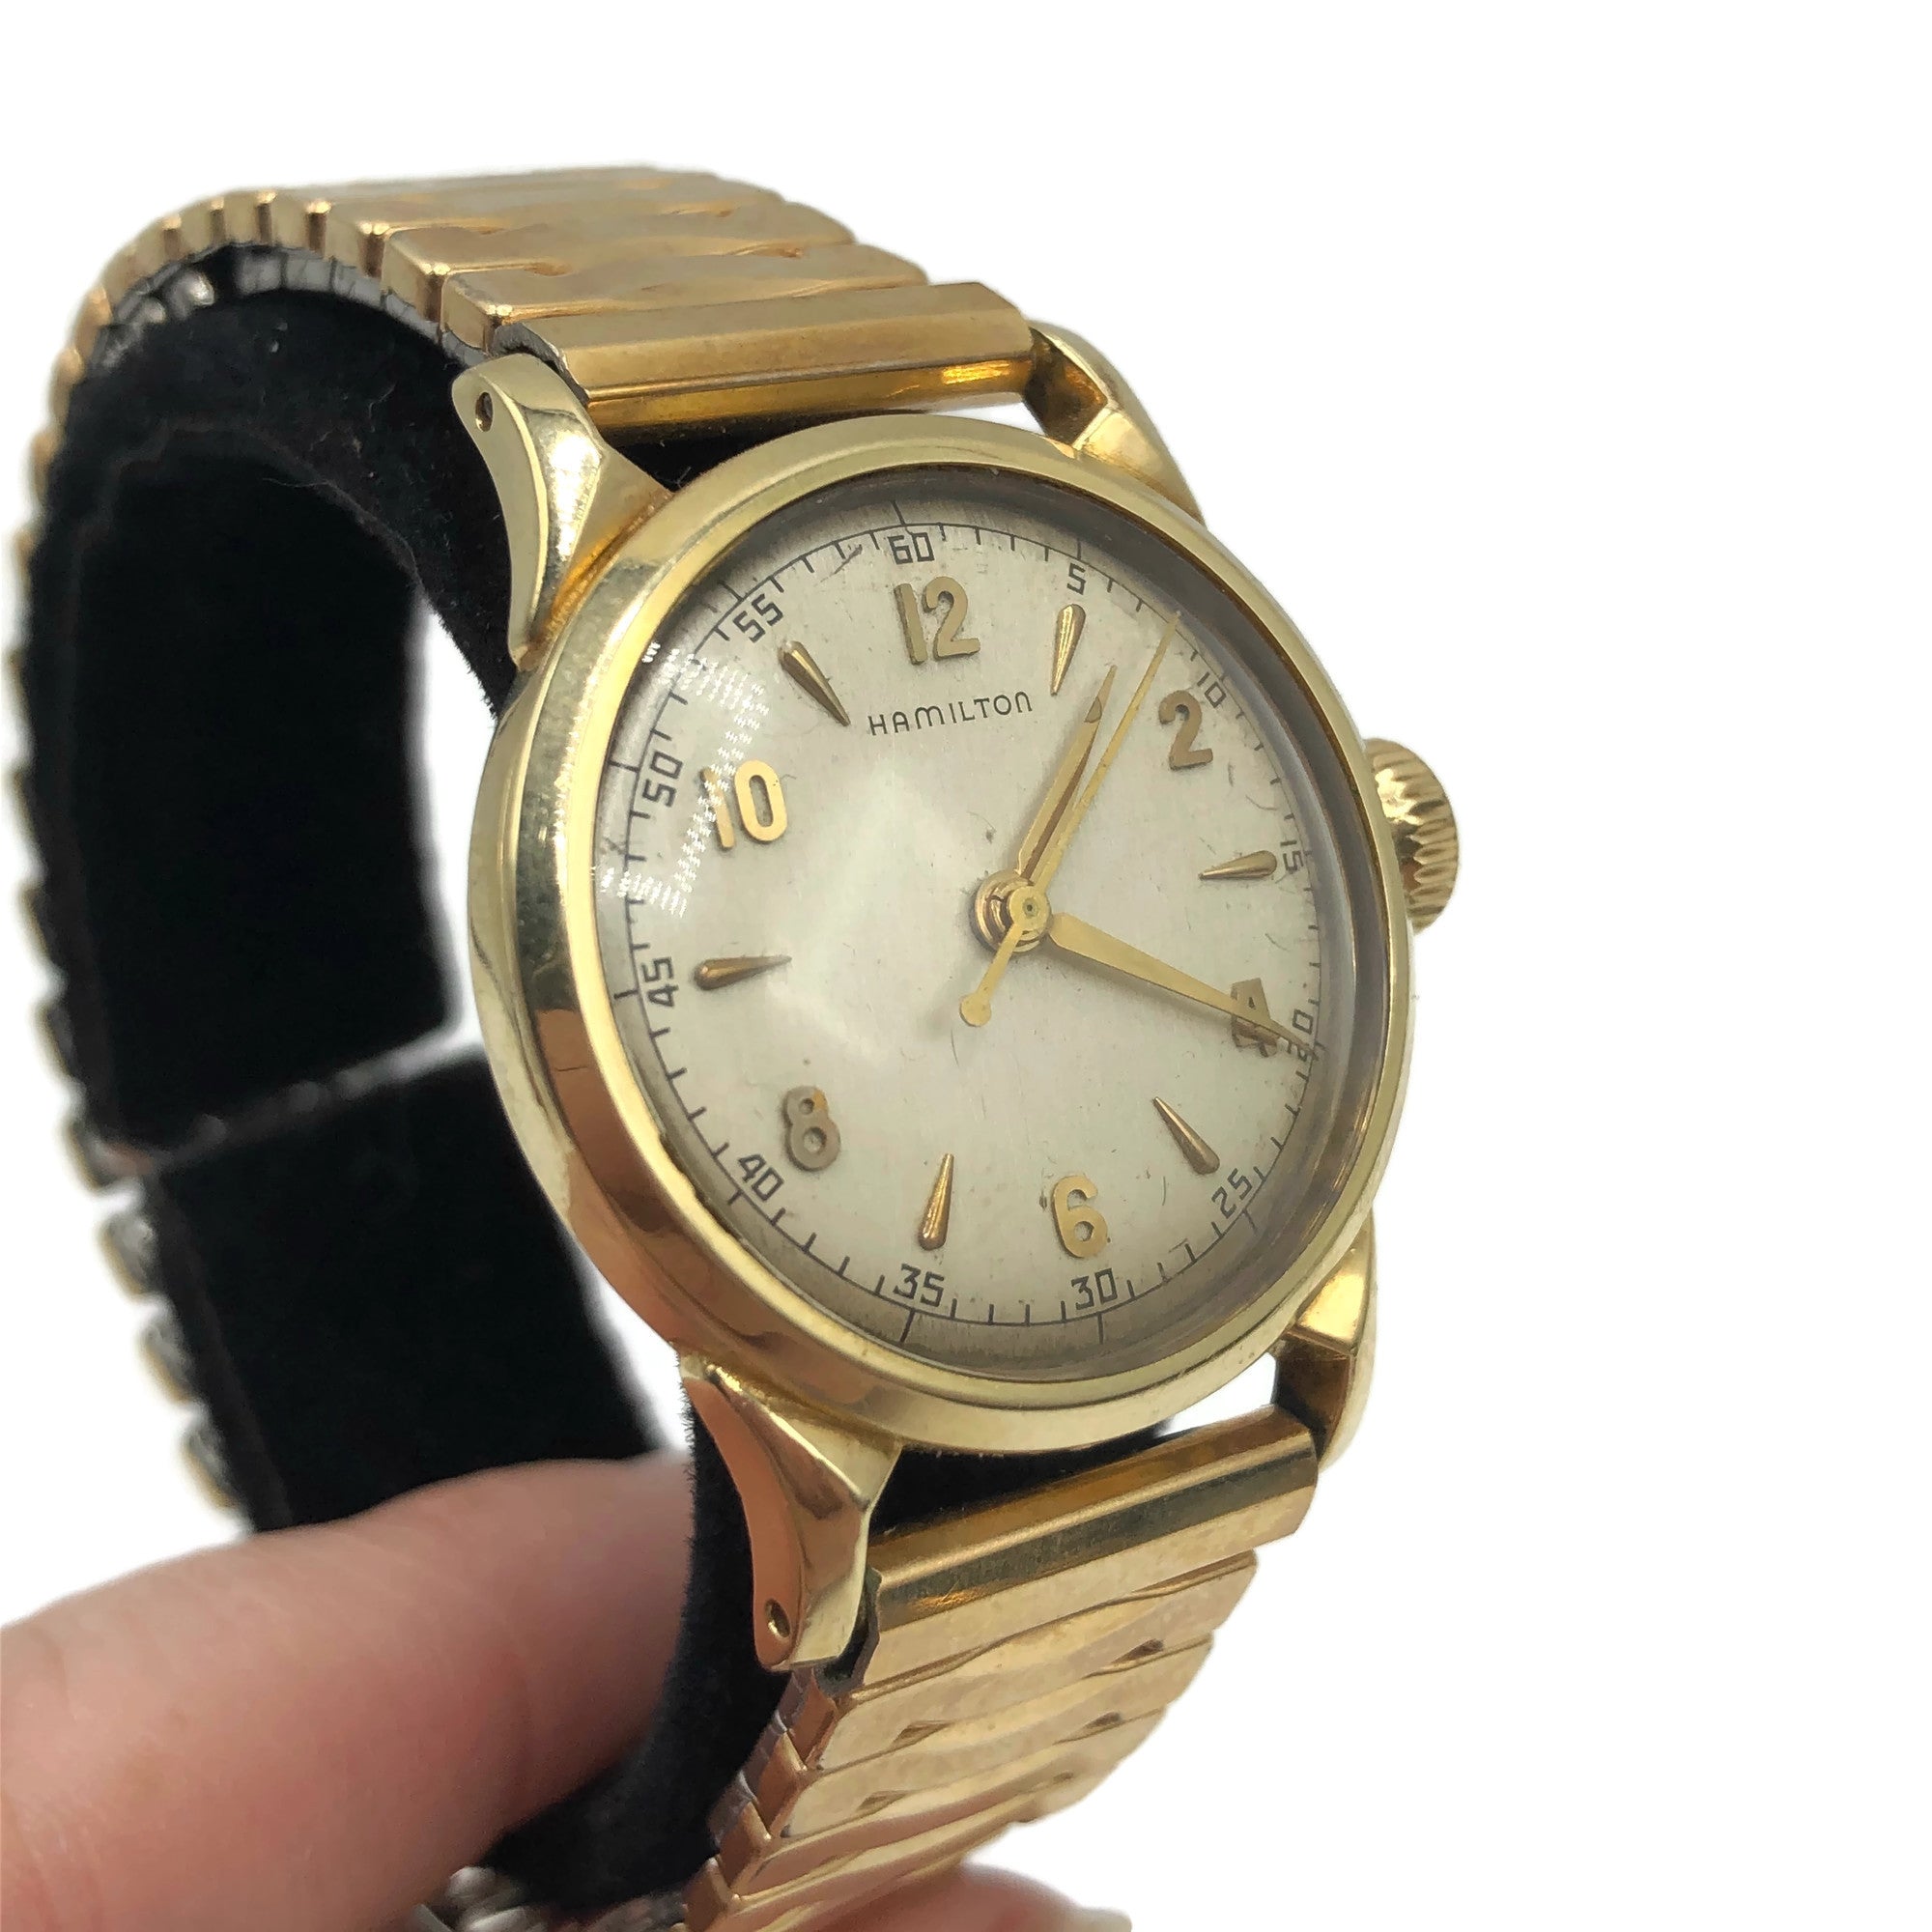 Vintage 14K Hamilton Round Face Wristwatch W/ Gold Filled Band – Long ...